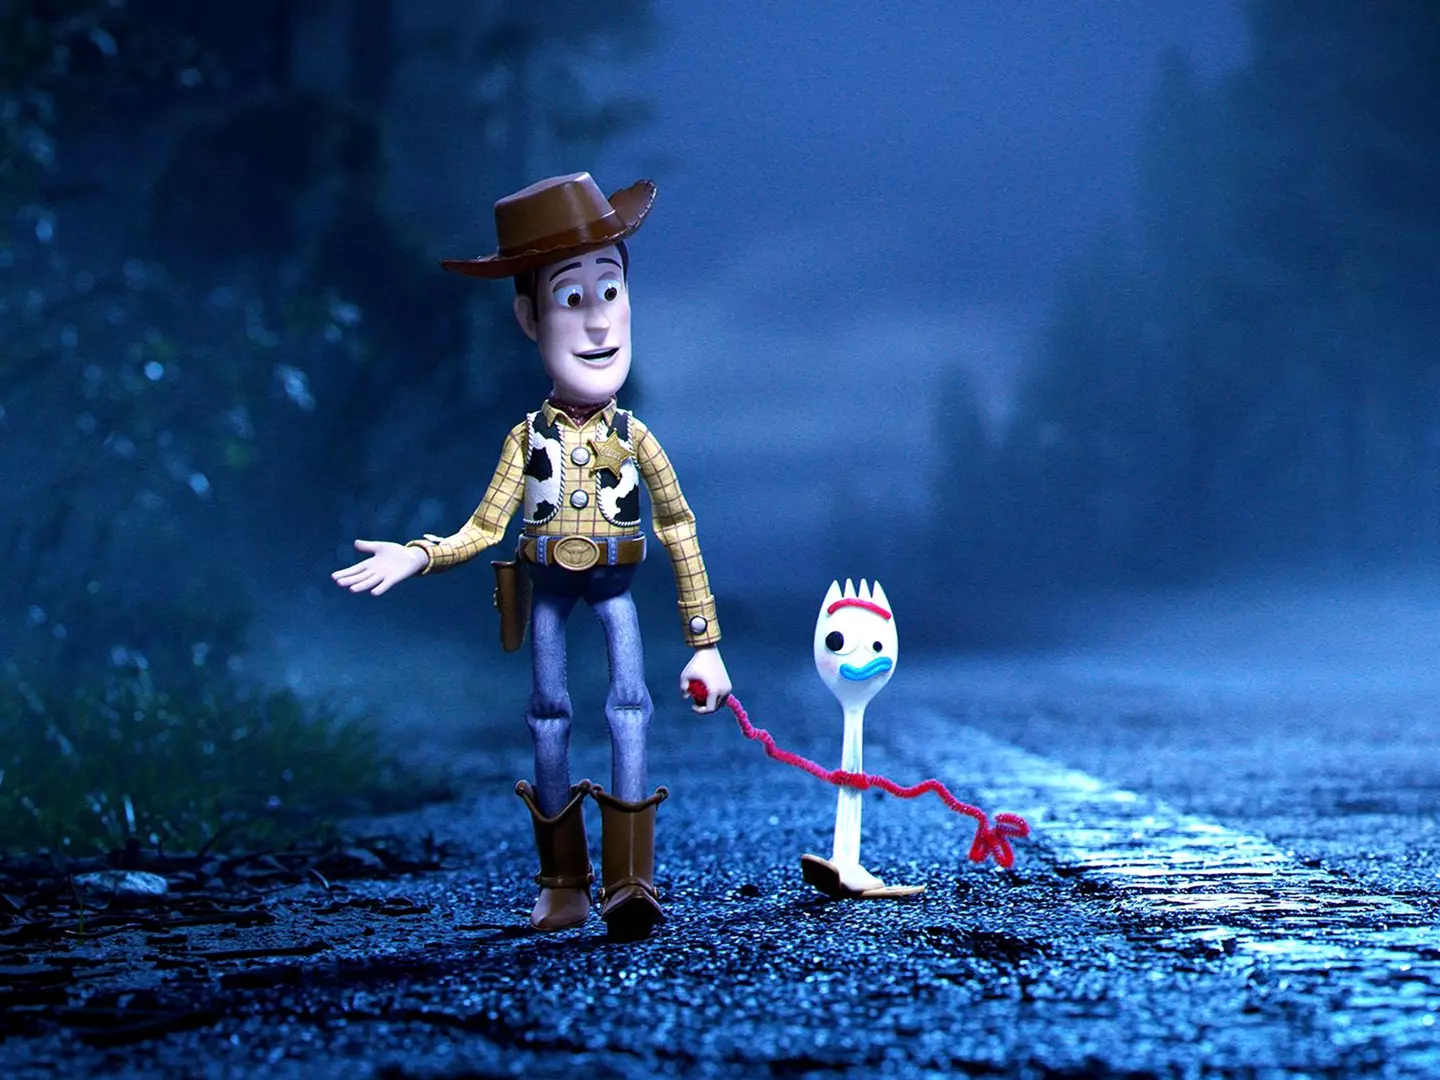 Woody and Forky go on an epic journey in Toy Story 4.